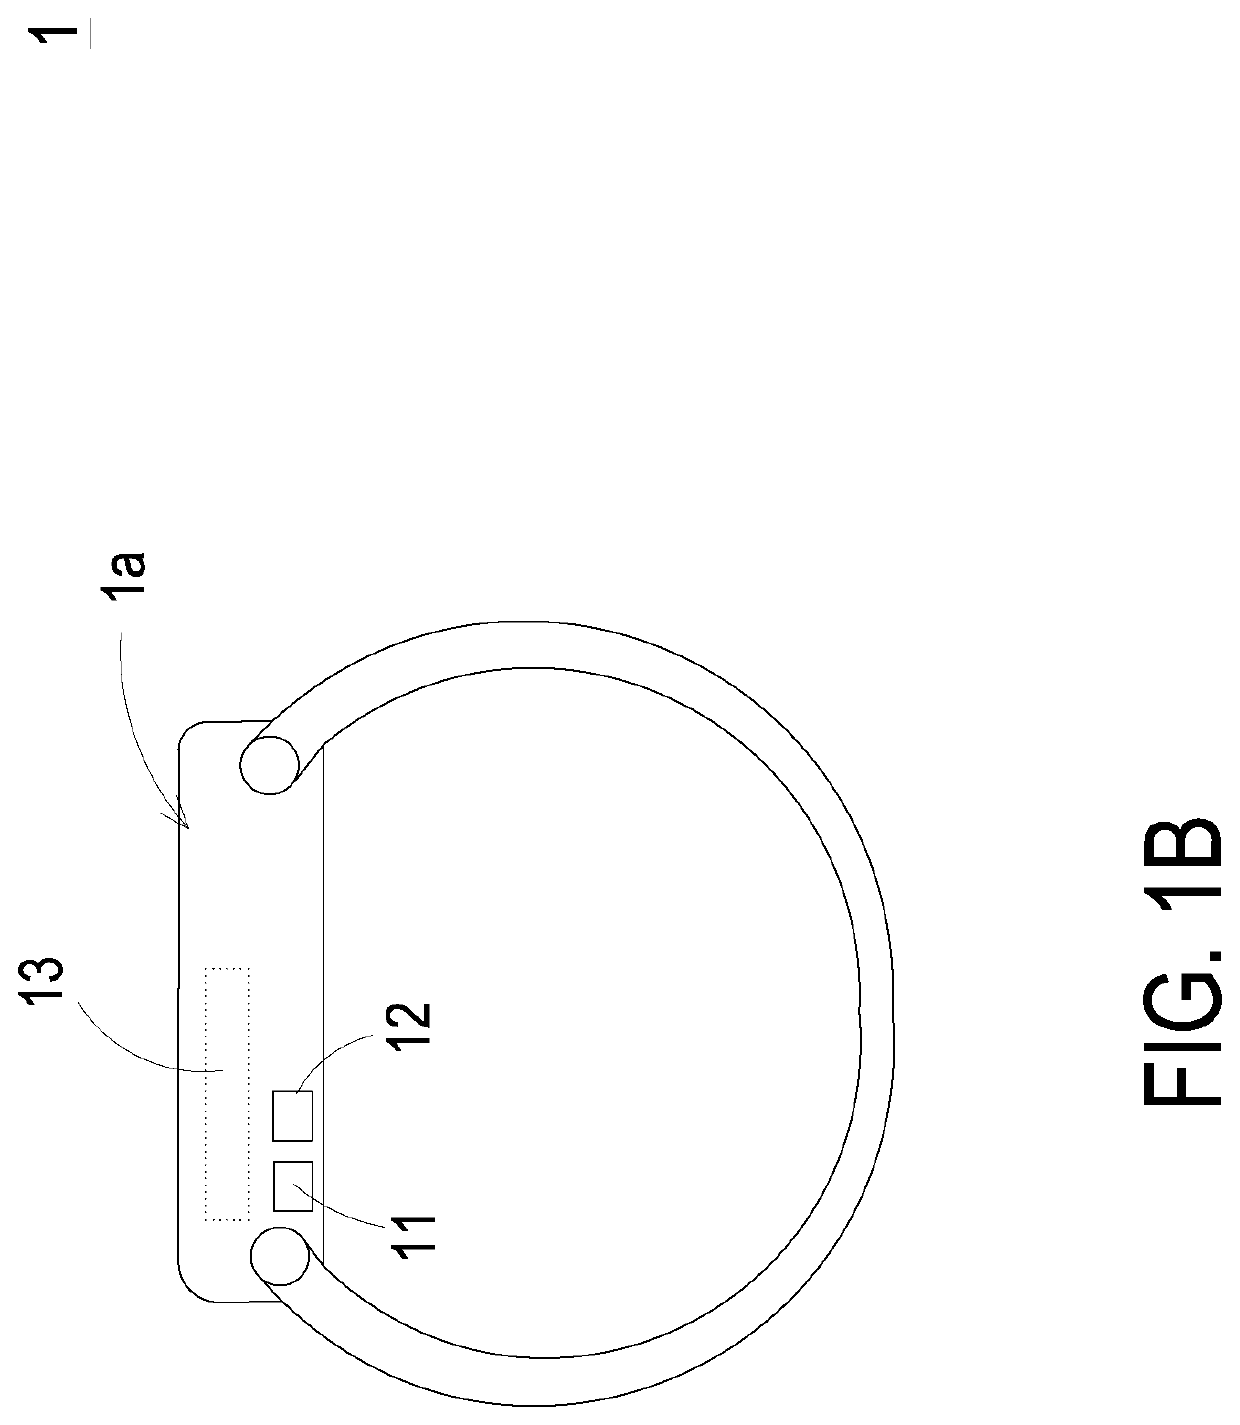 Method of preventing and handling indoor air pollution